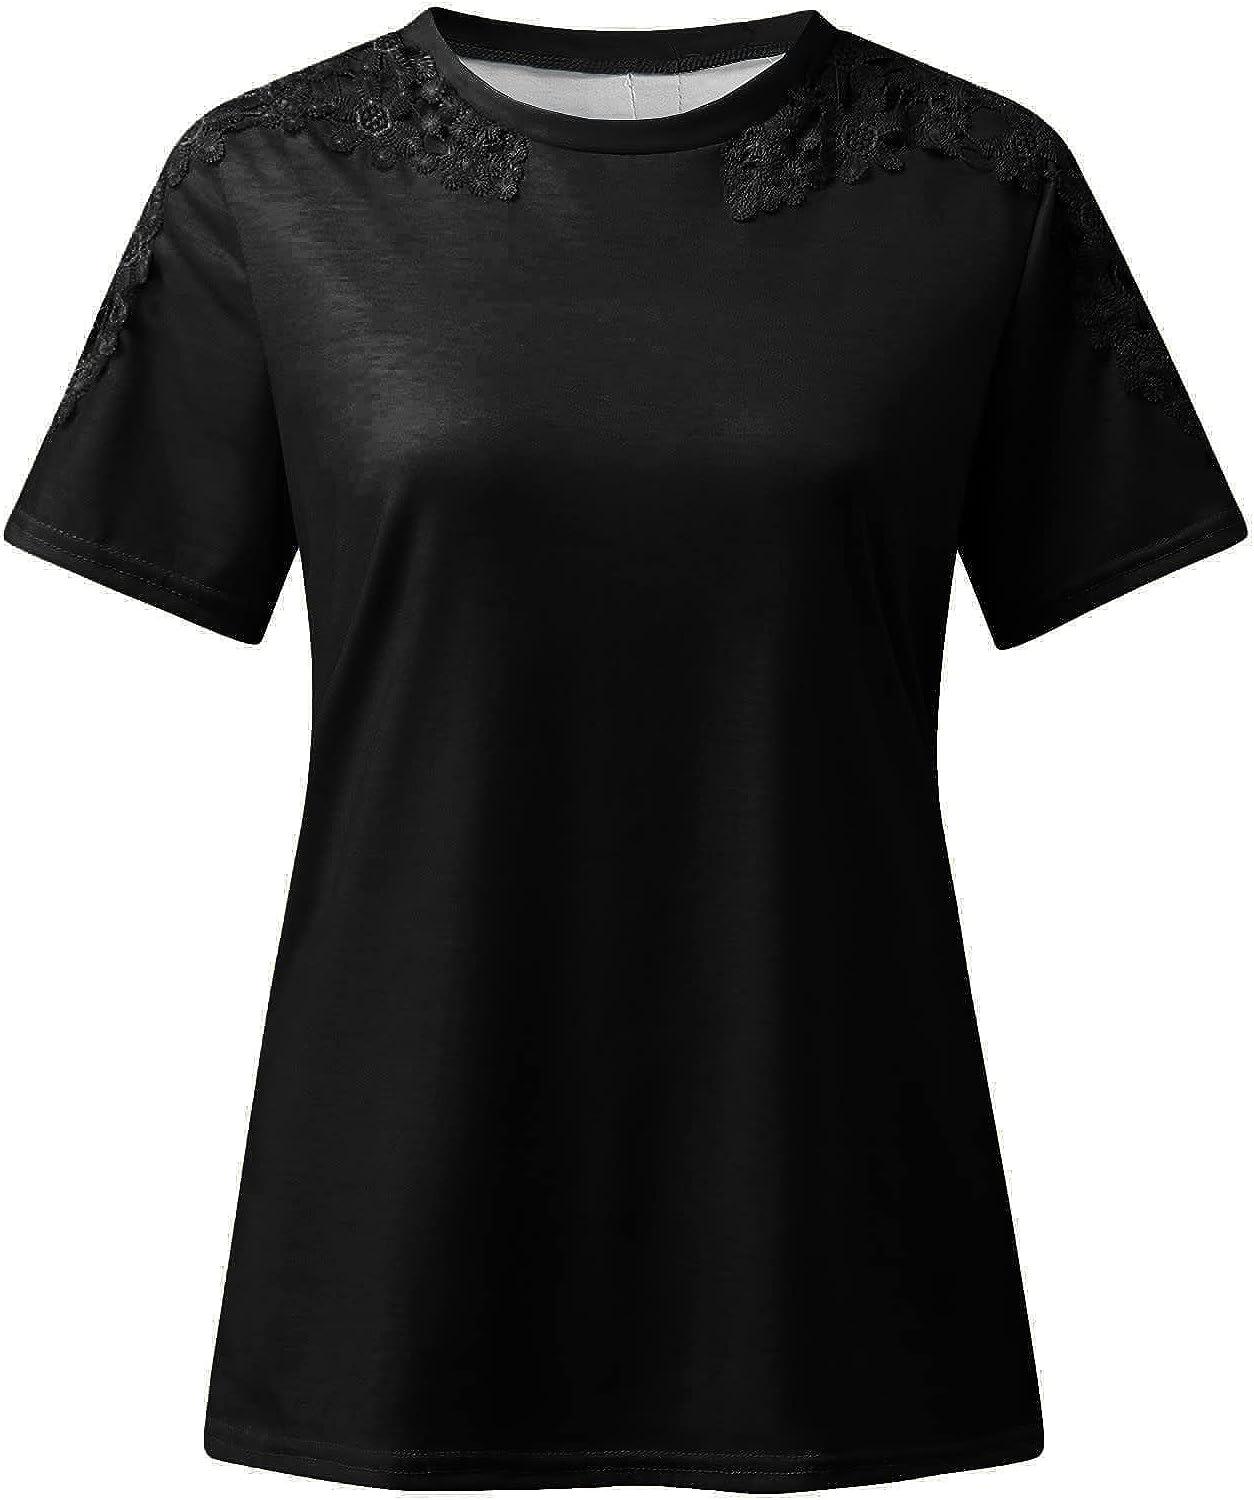 tklpehg Summer Tops for Women Clearance Ladies Tops Casual Relaxed Fit  Short Sleeve T Shirts Lapel Solid Color Blouses Black 12 (XXL) 